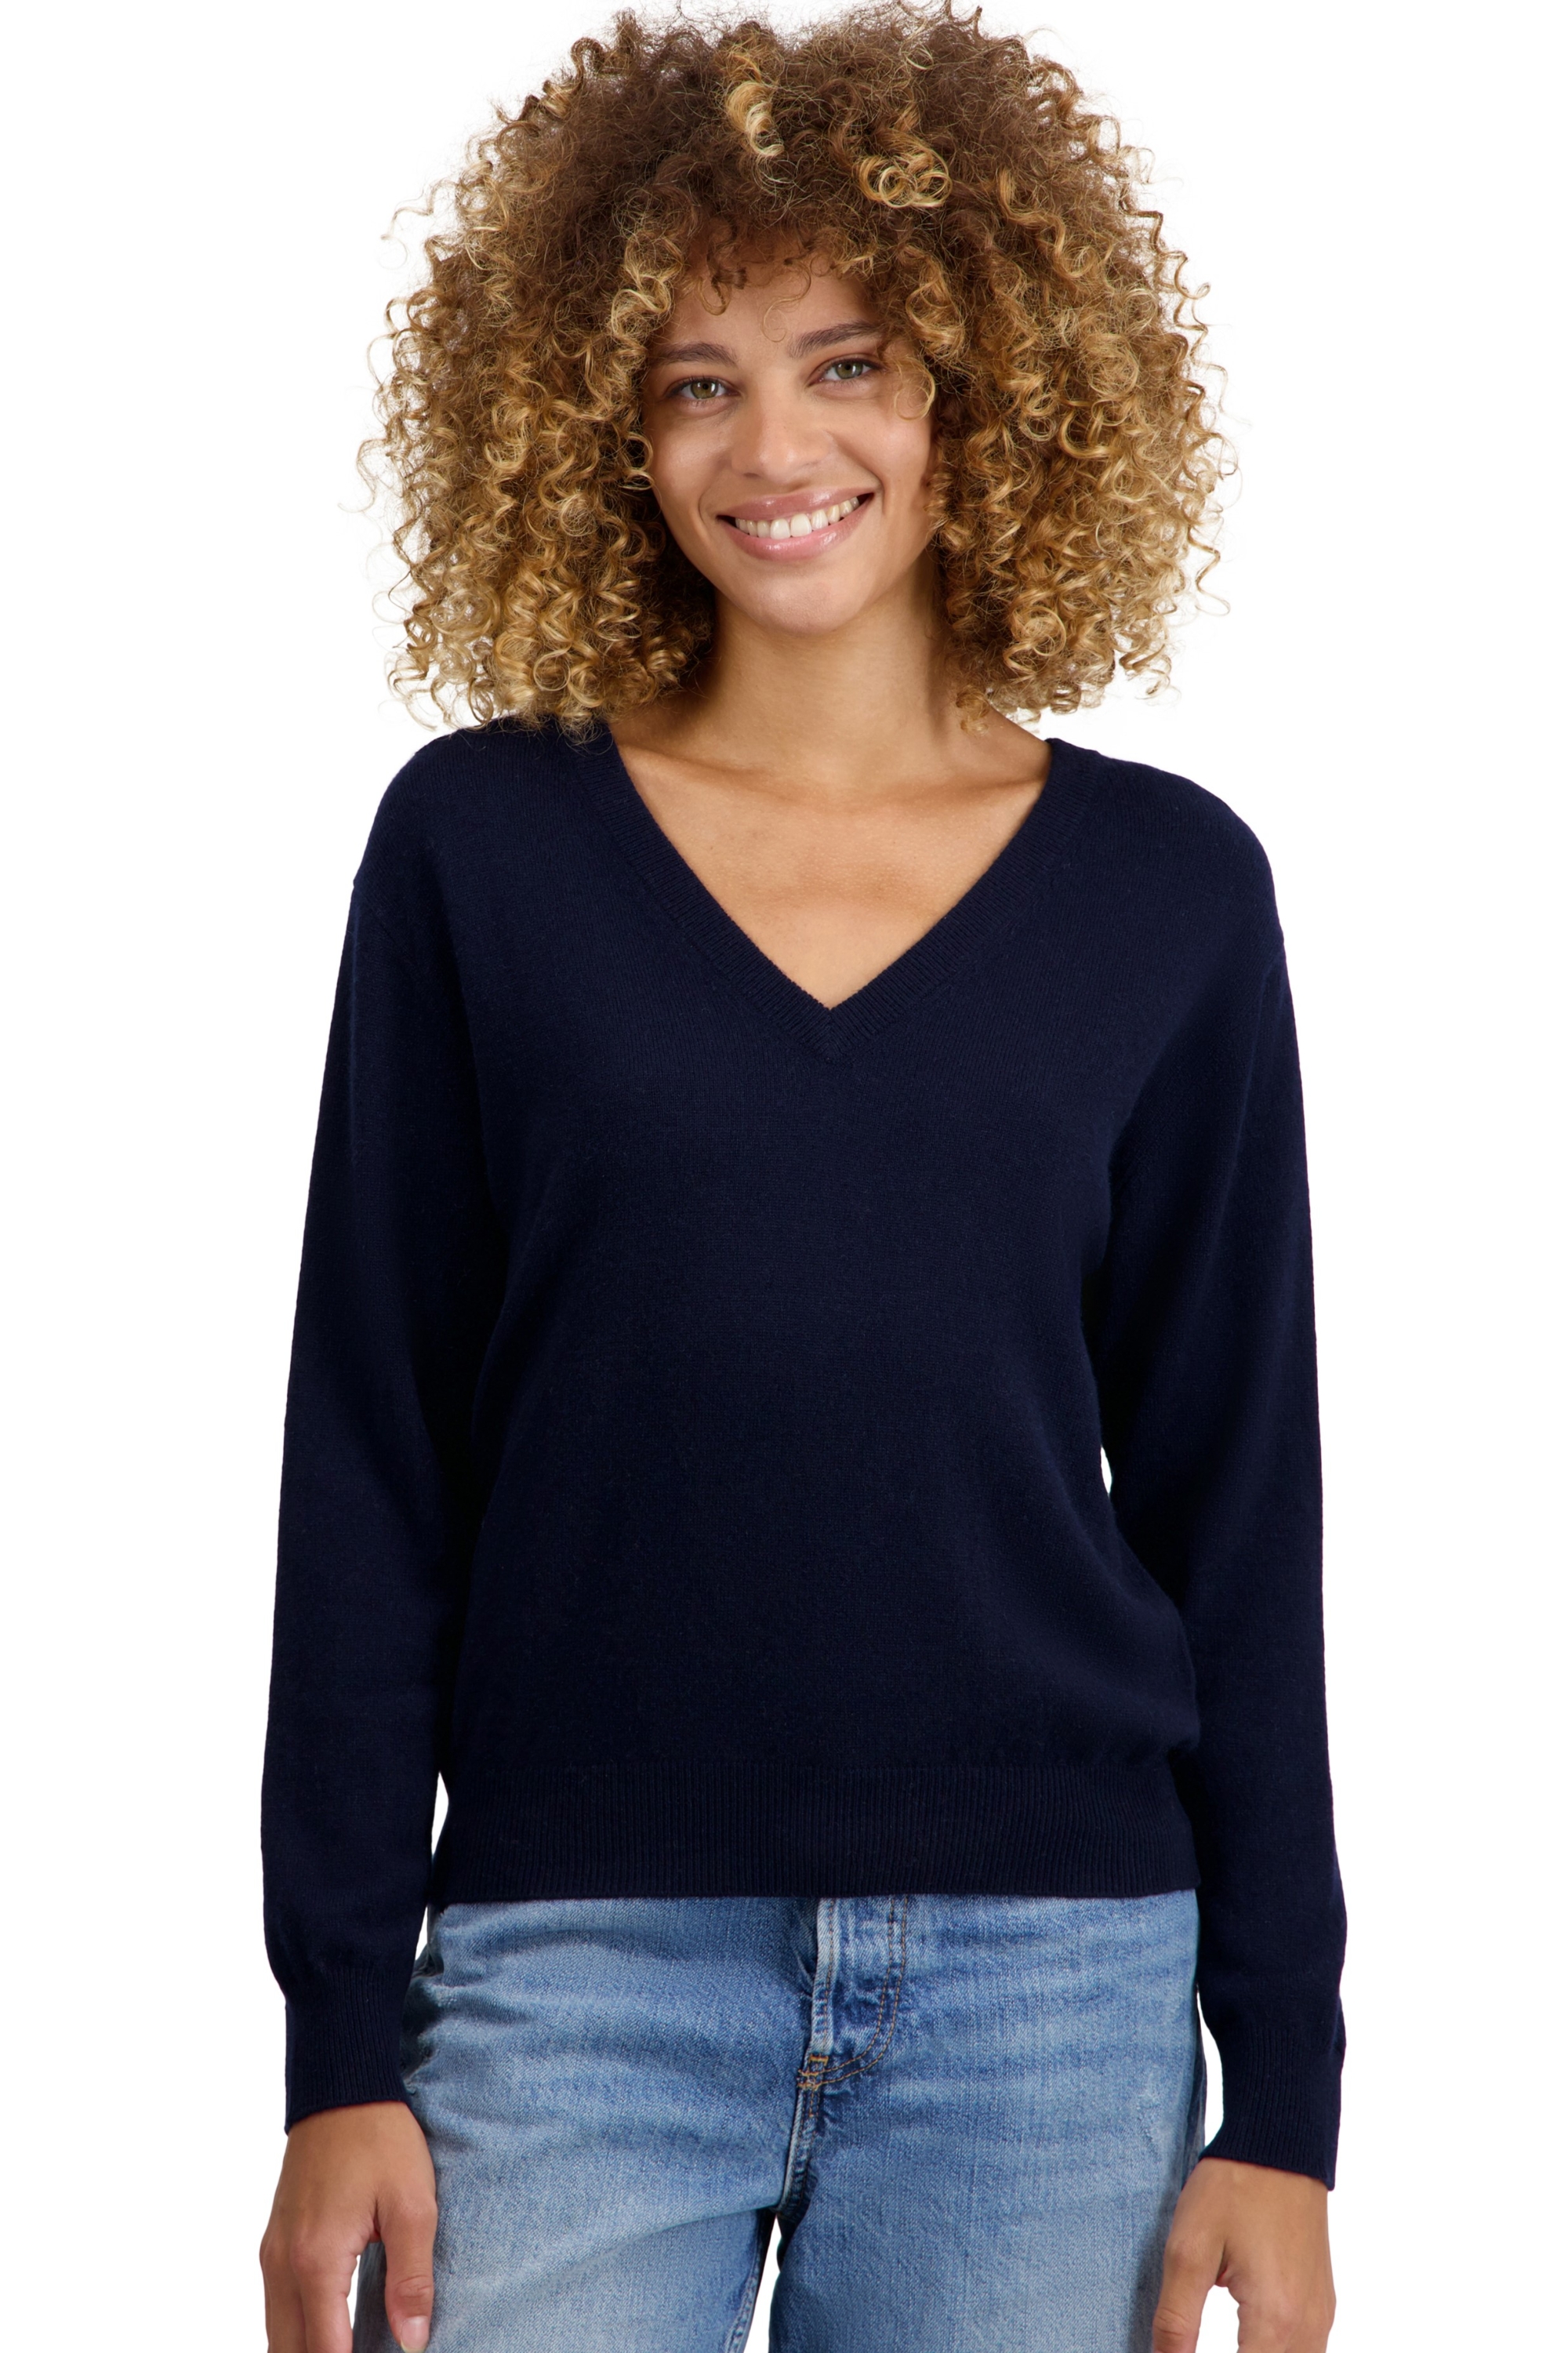 Cachemire pull femme tornade marine fonce xs